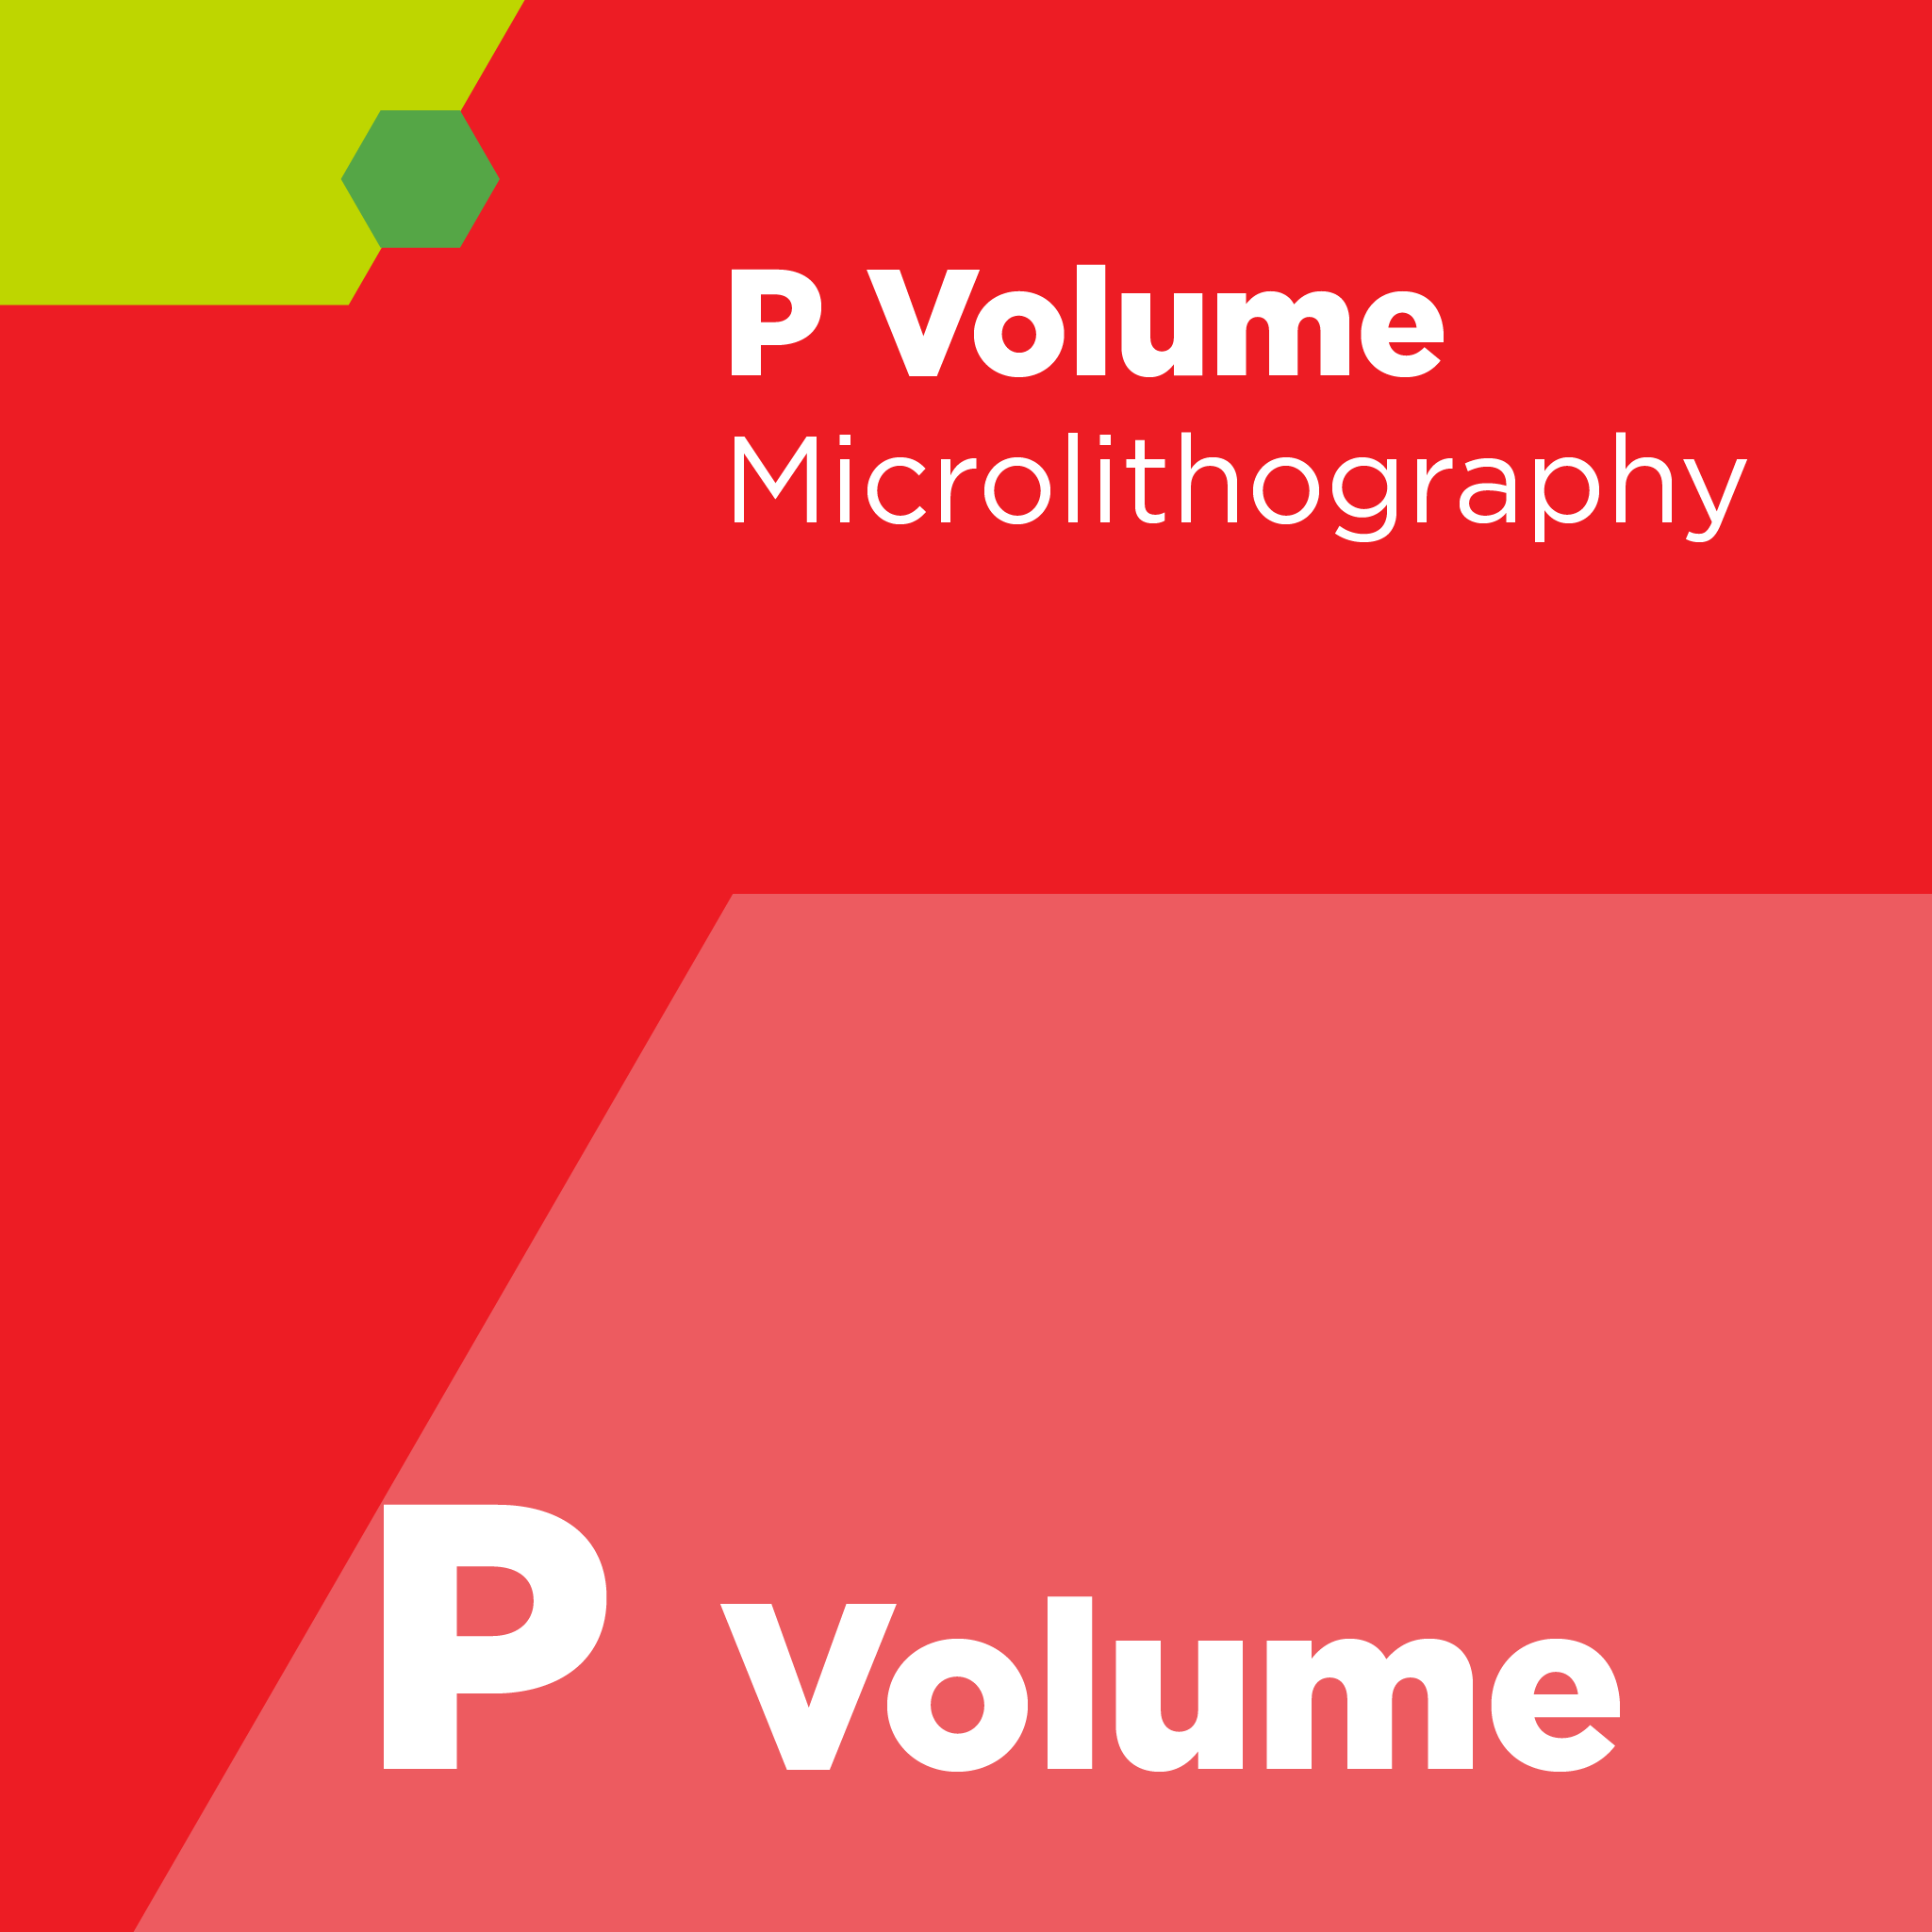 P03500 - SEMI P35 - Terminology for Microlithography Metrology